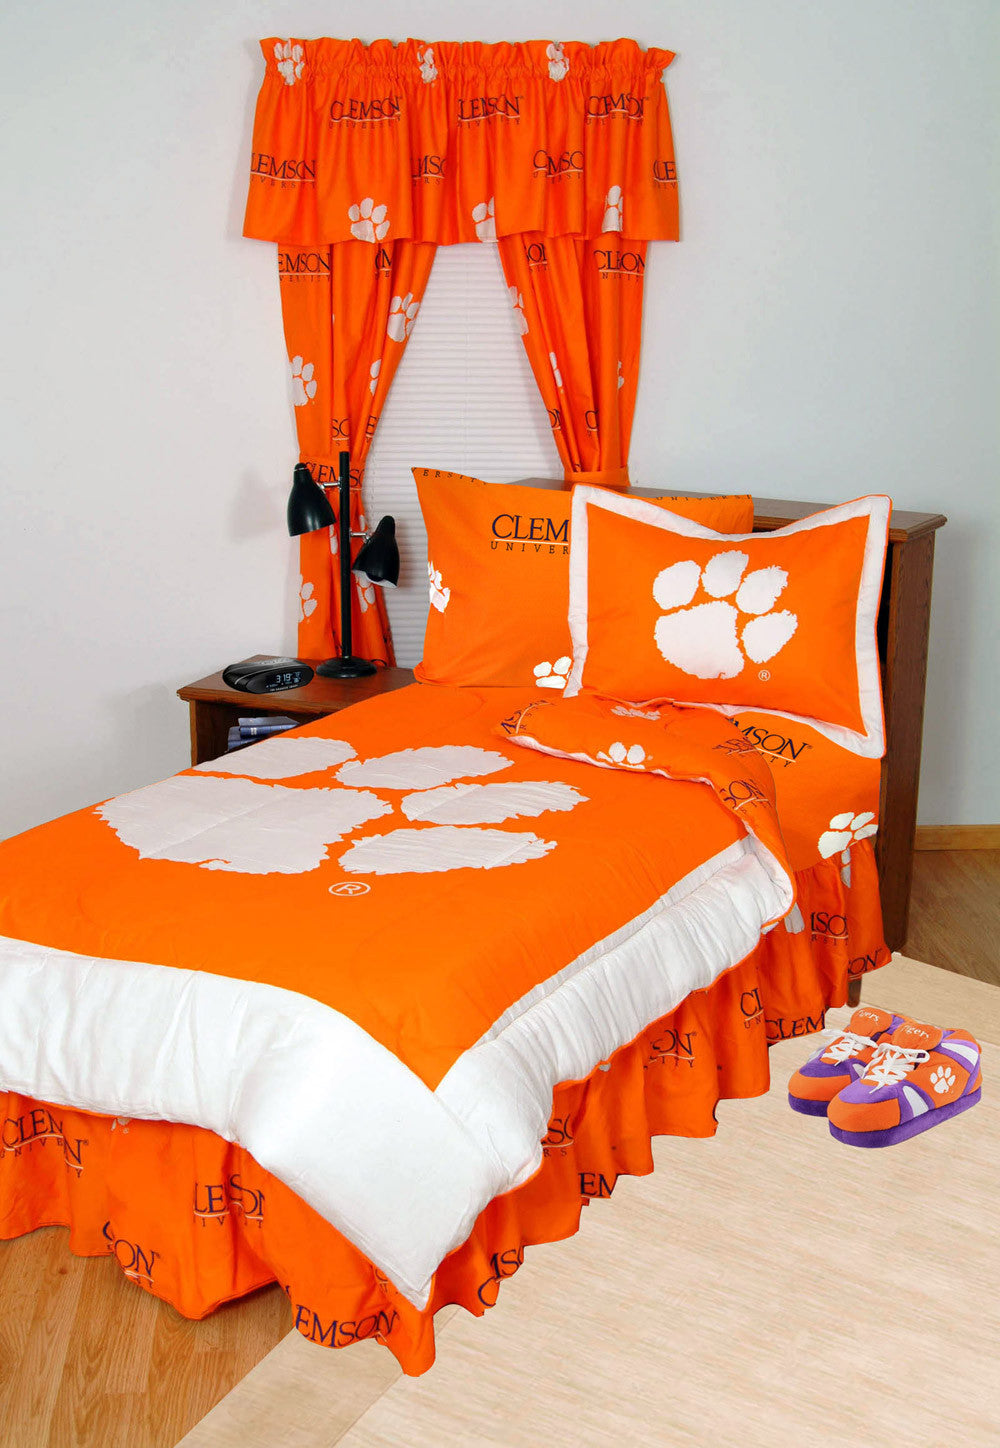 Clemson Bed In A Bag Full - With Team Colored Sheets - Clebbfl By College Covers